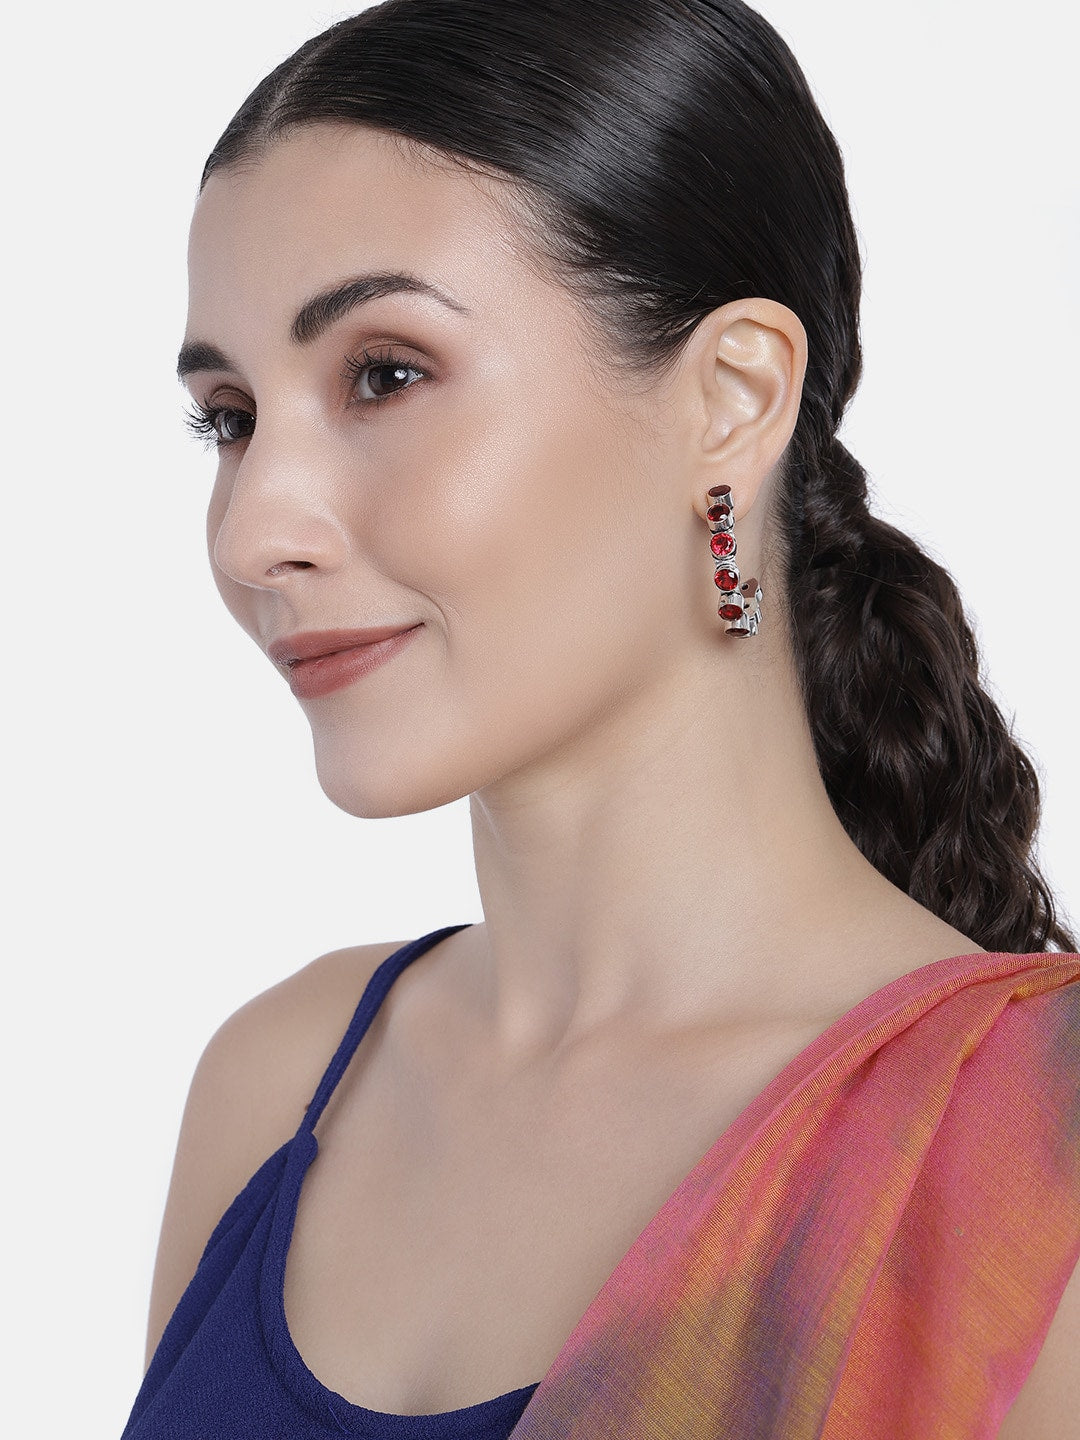 EL REGALO Red & Oxidised Silver-Toned Circular Stone Studded Half Hoop Earrings - for Women and Girls
Style ID: 16193852